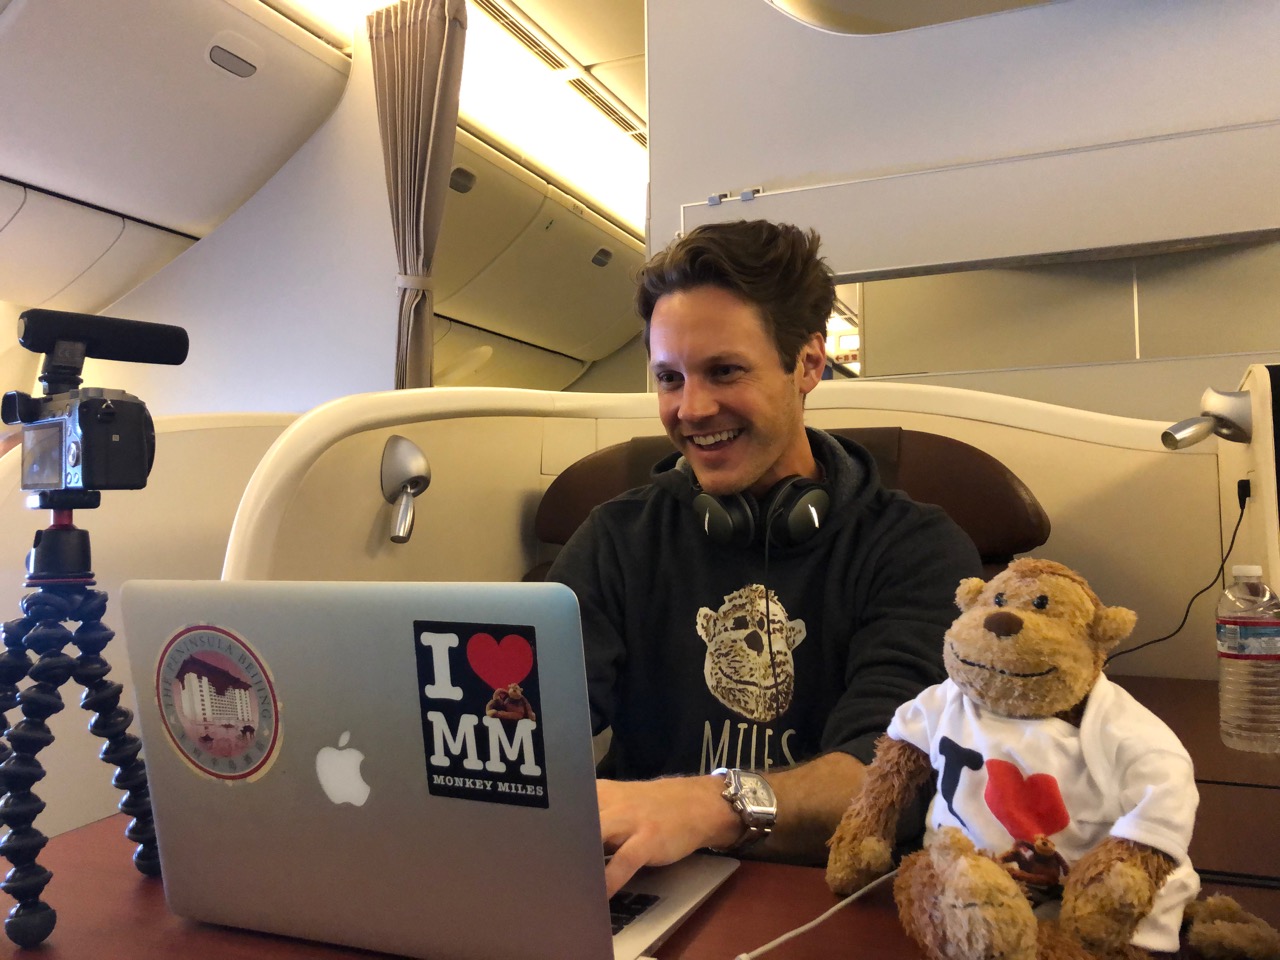 a man sitting at a desk with a laptop and a stuffed animal